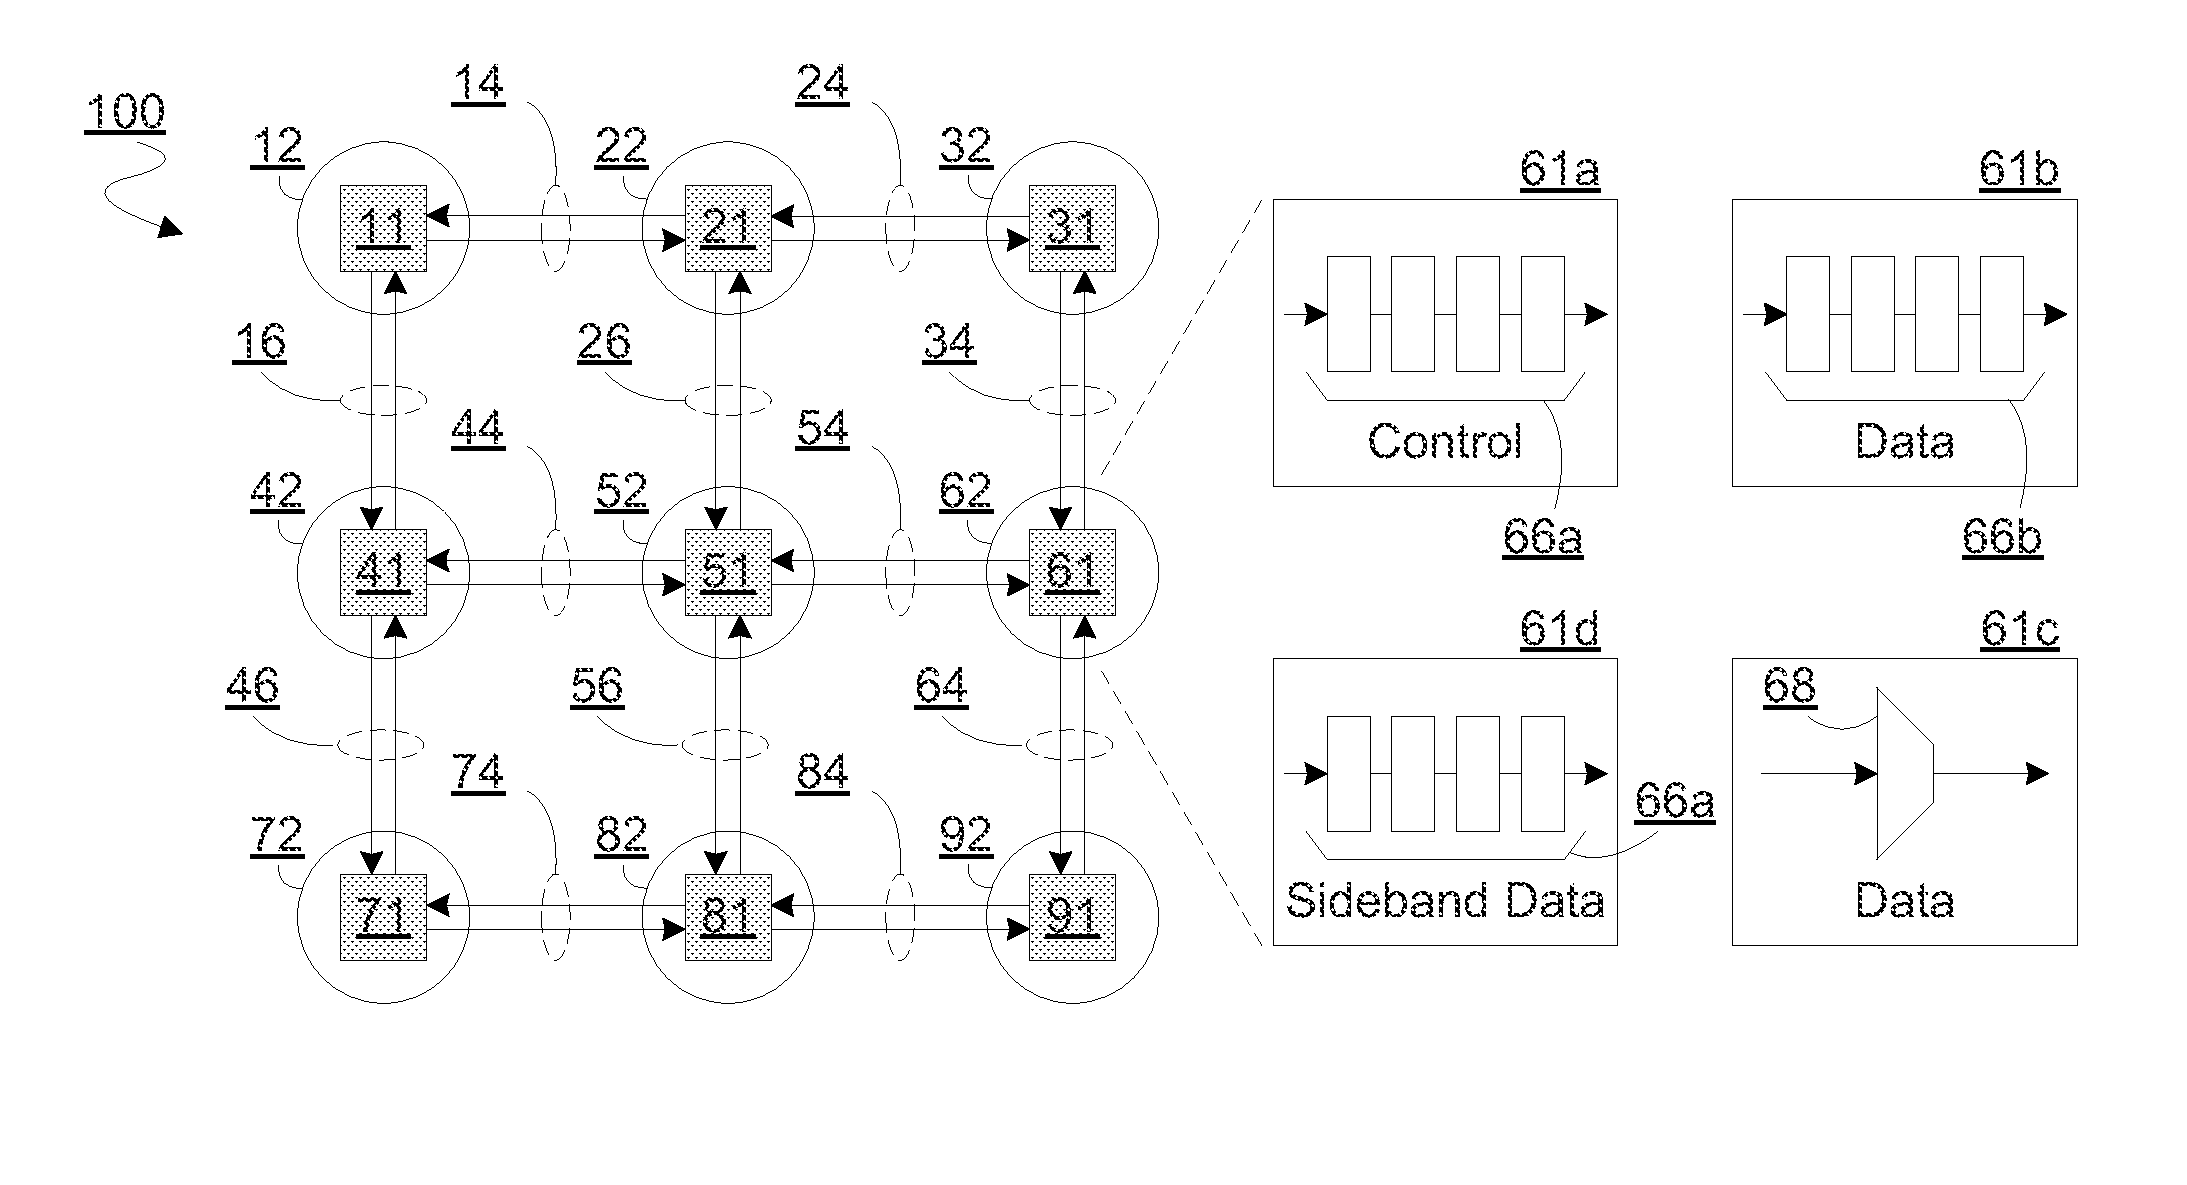 Architecture and method for hybrid circuit-switched and packet-switched router